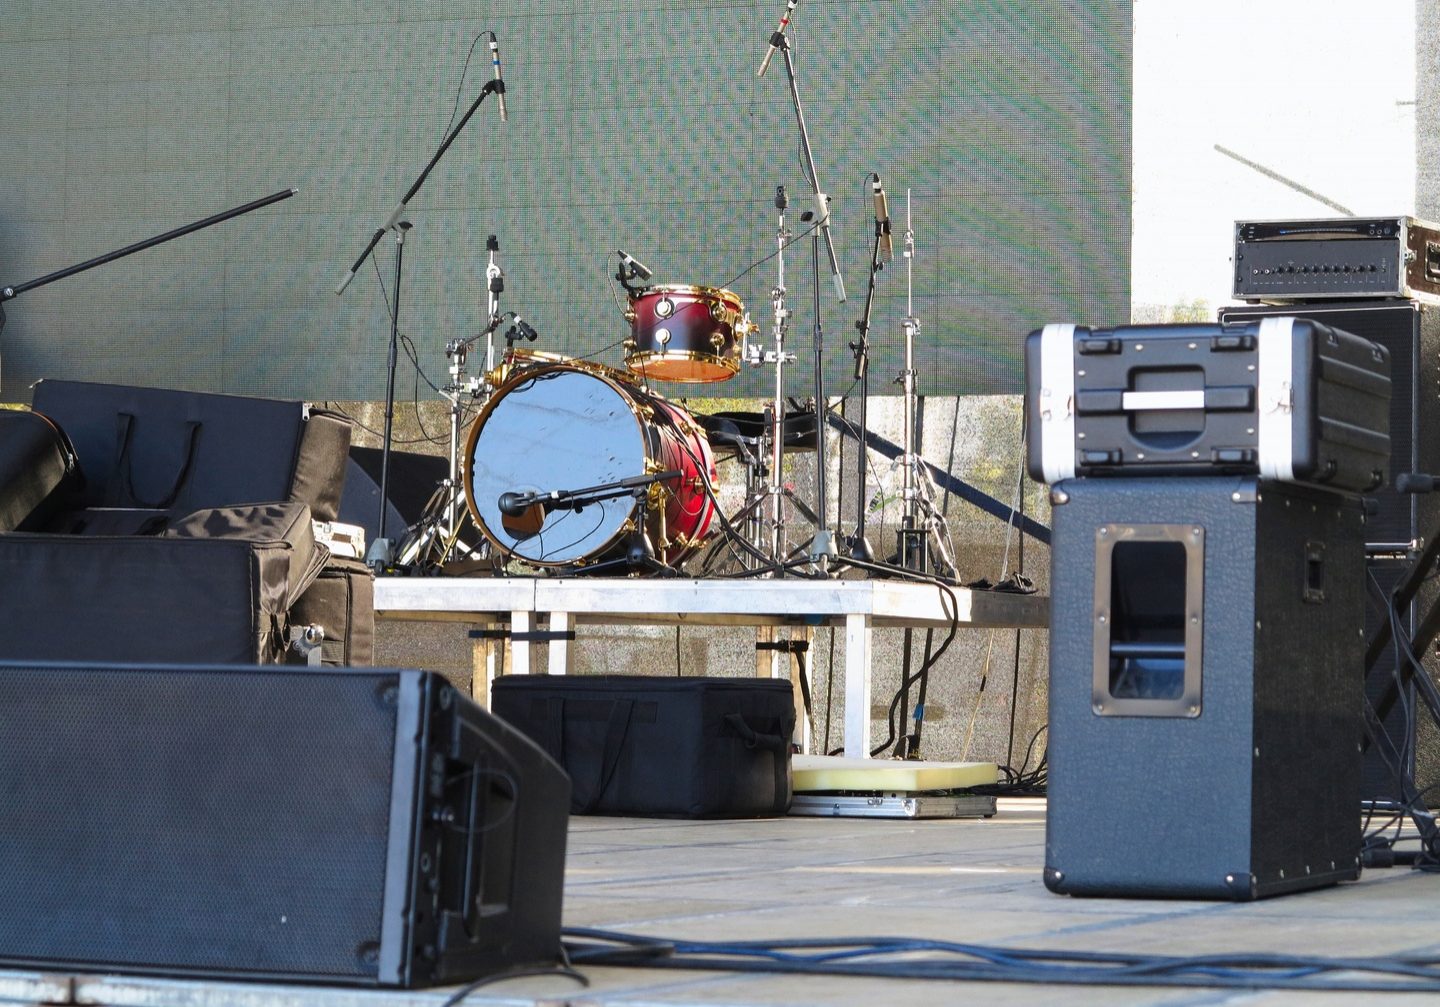 Drum set, microphones and speakers on stage ready for concert